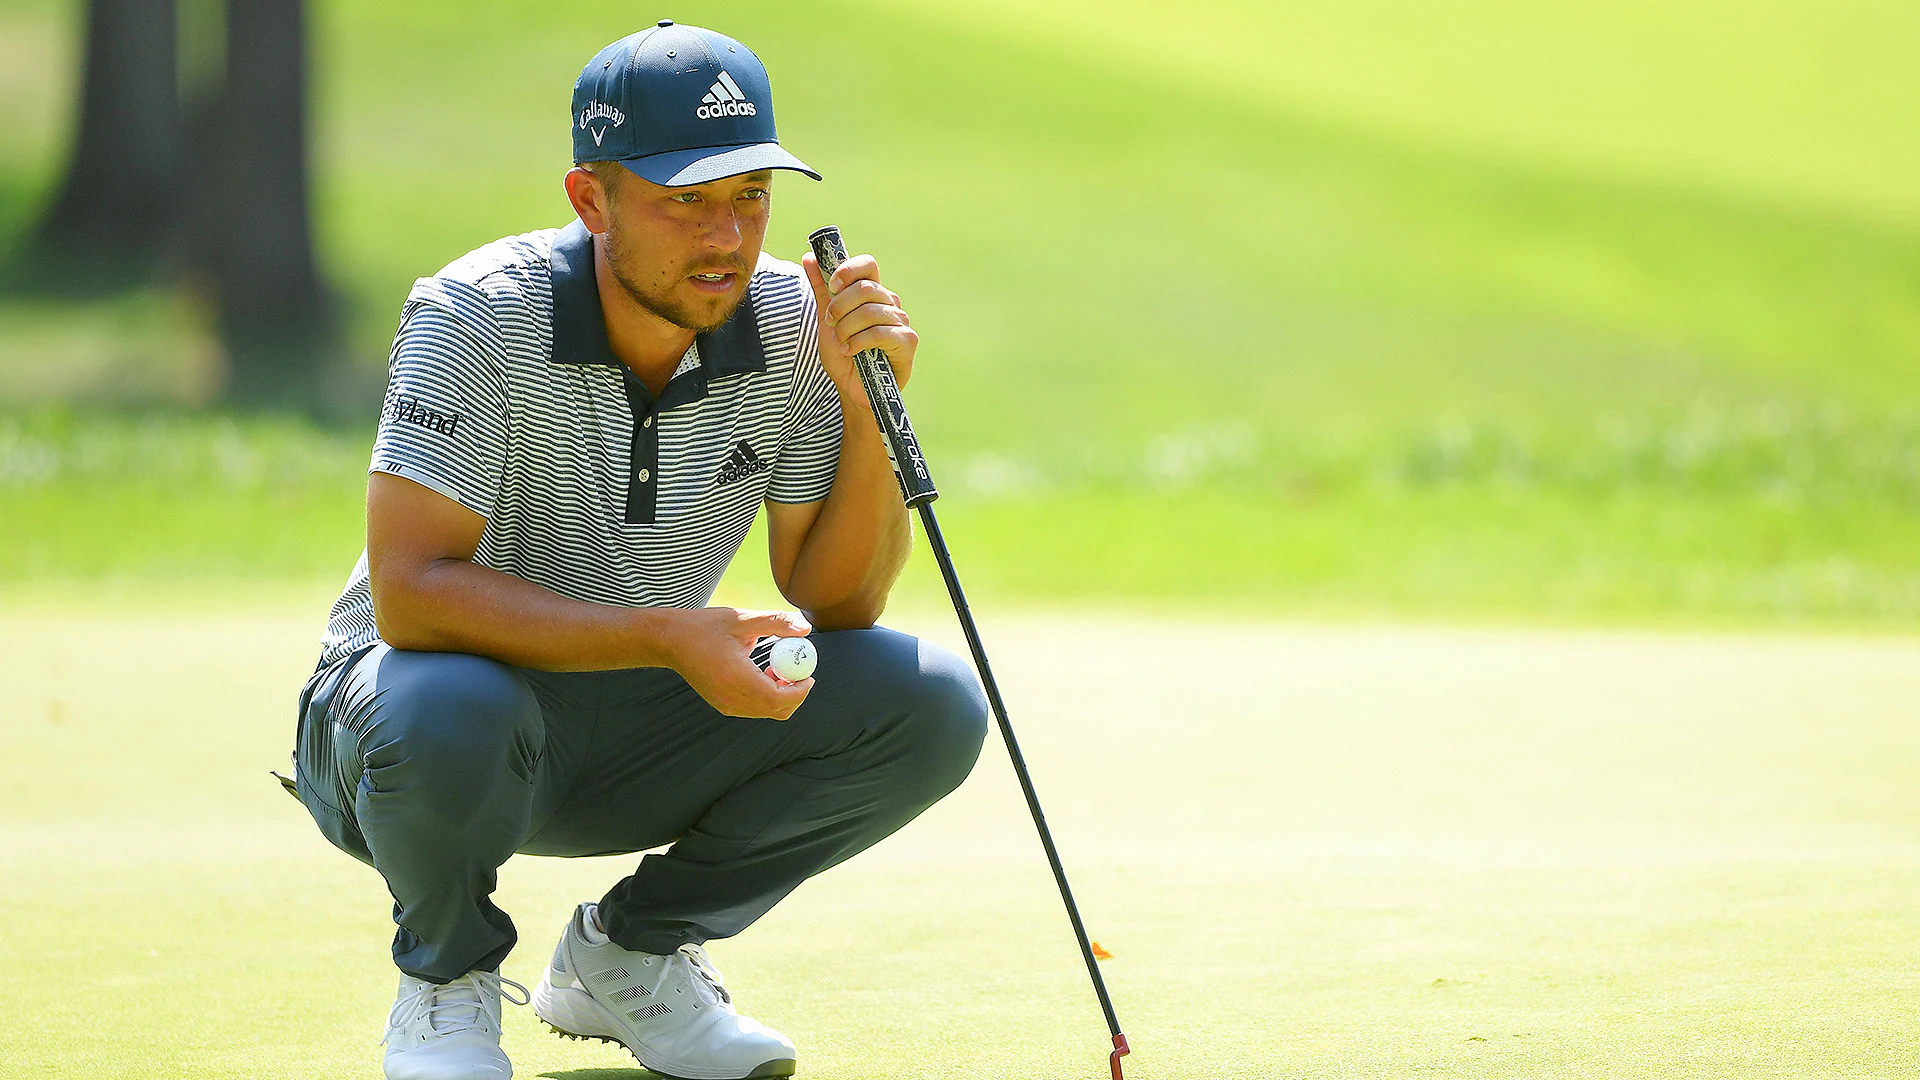 After briefly losing putter, Xander Schauffele opens nicely at BMW Championship